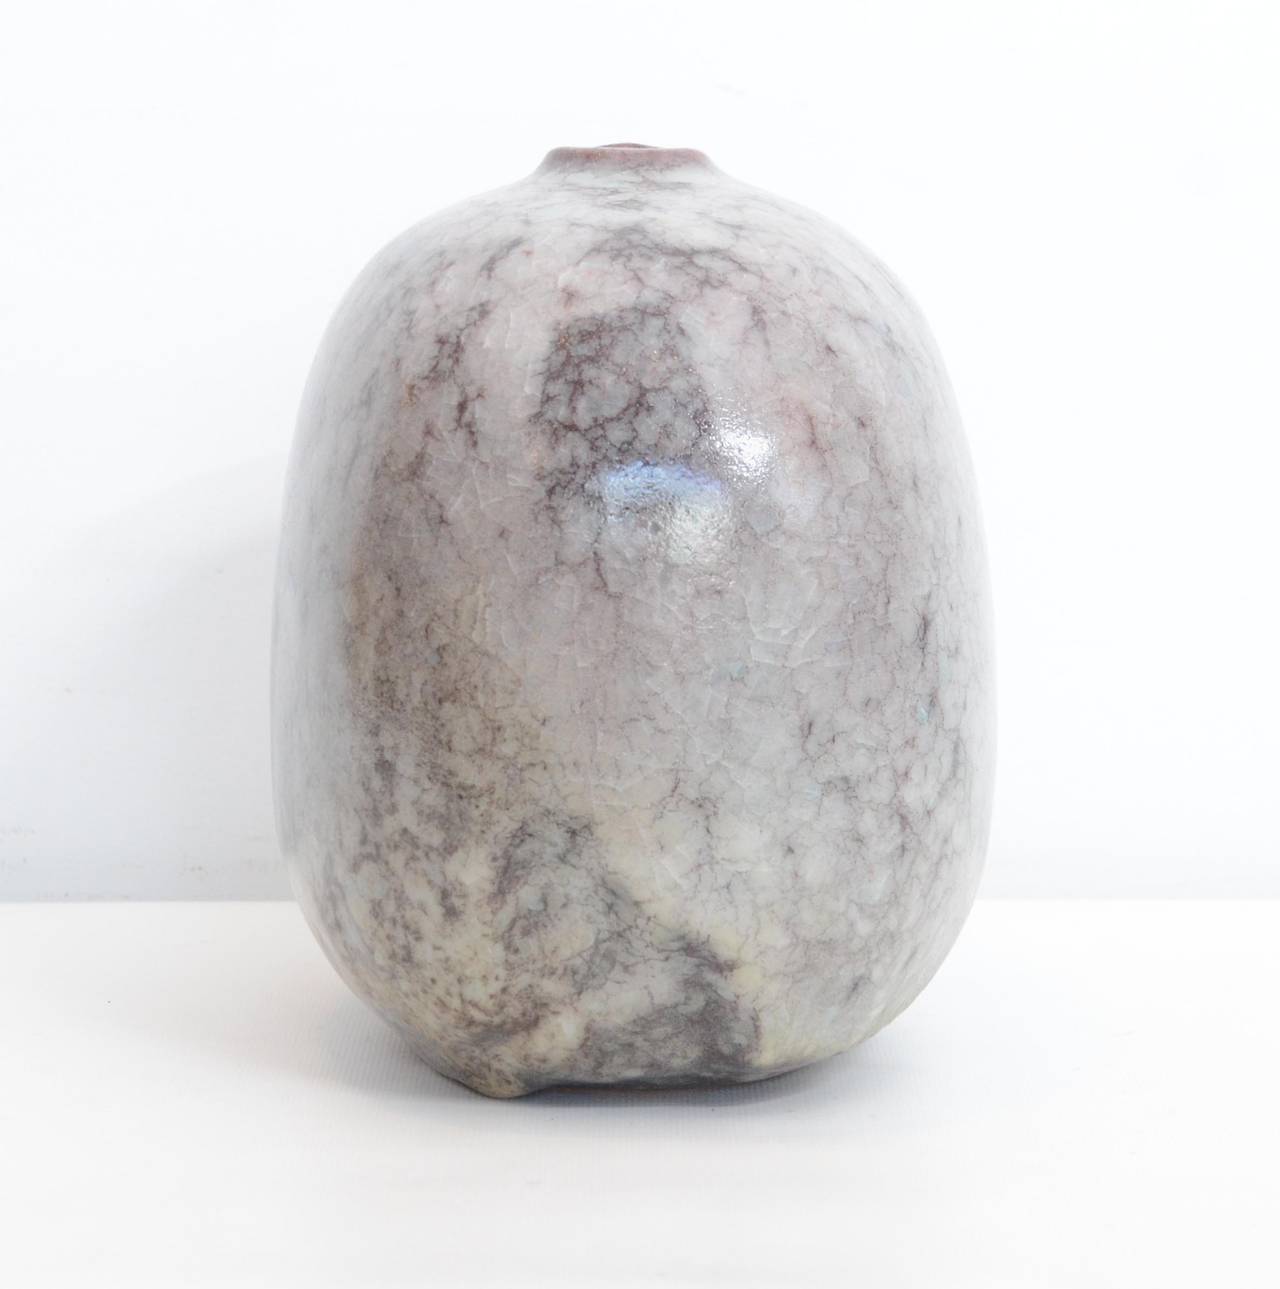 Japanese ceramic vase by Yasuda Zenko (b. 1926), 20th century.

Dimensions: H 20.5 cm x W 21 cm x D 14 cm.

A well respected 20th century Japanese potter, Yasuda Zenko studied at the Kyoto Craft-Fabric University where he specialized in the making